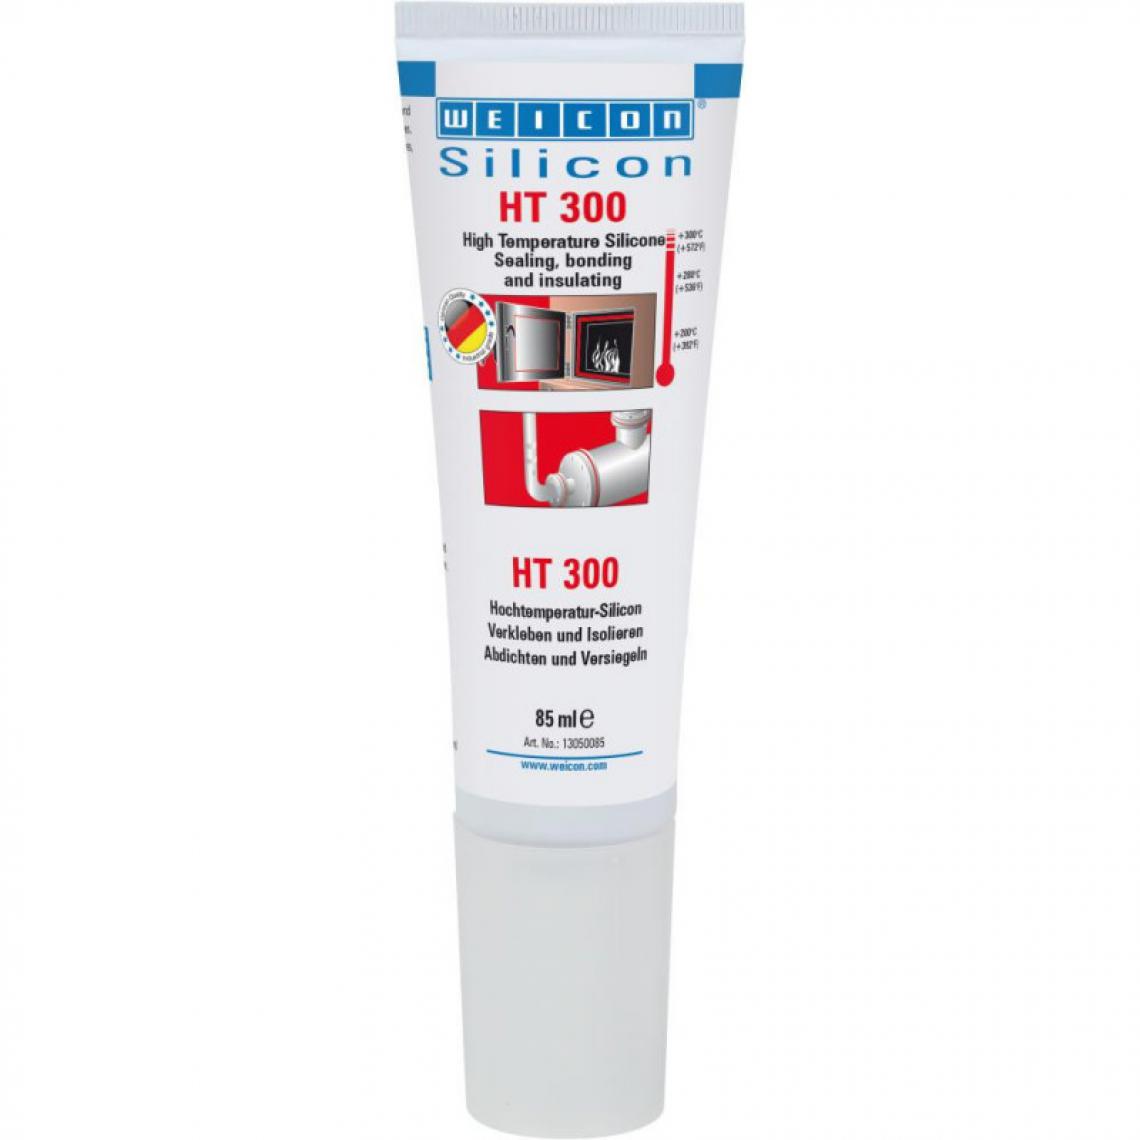 marque generique - Silicone HT 300 85 ml Weicon (Par 12) - Mastic, silicone, joint